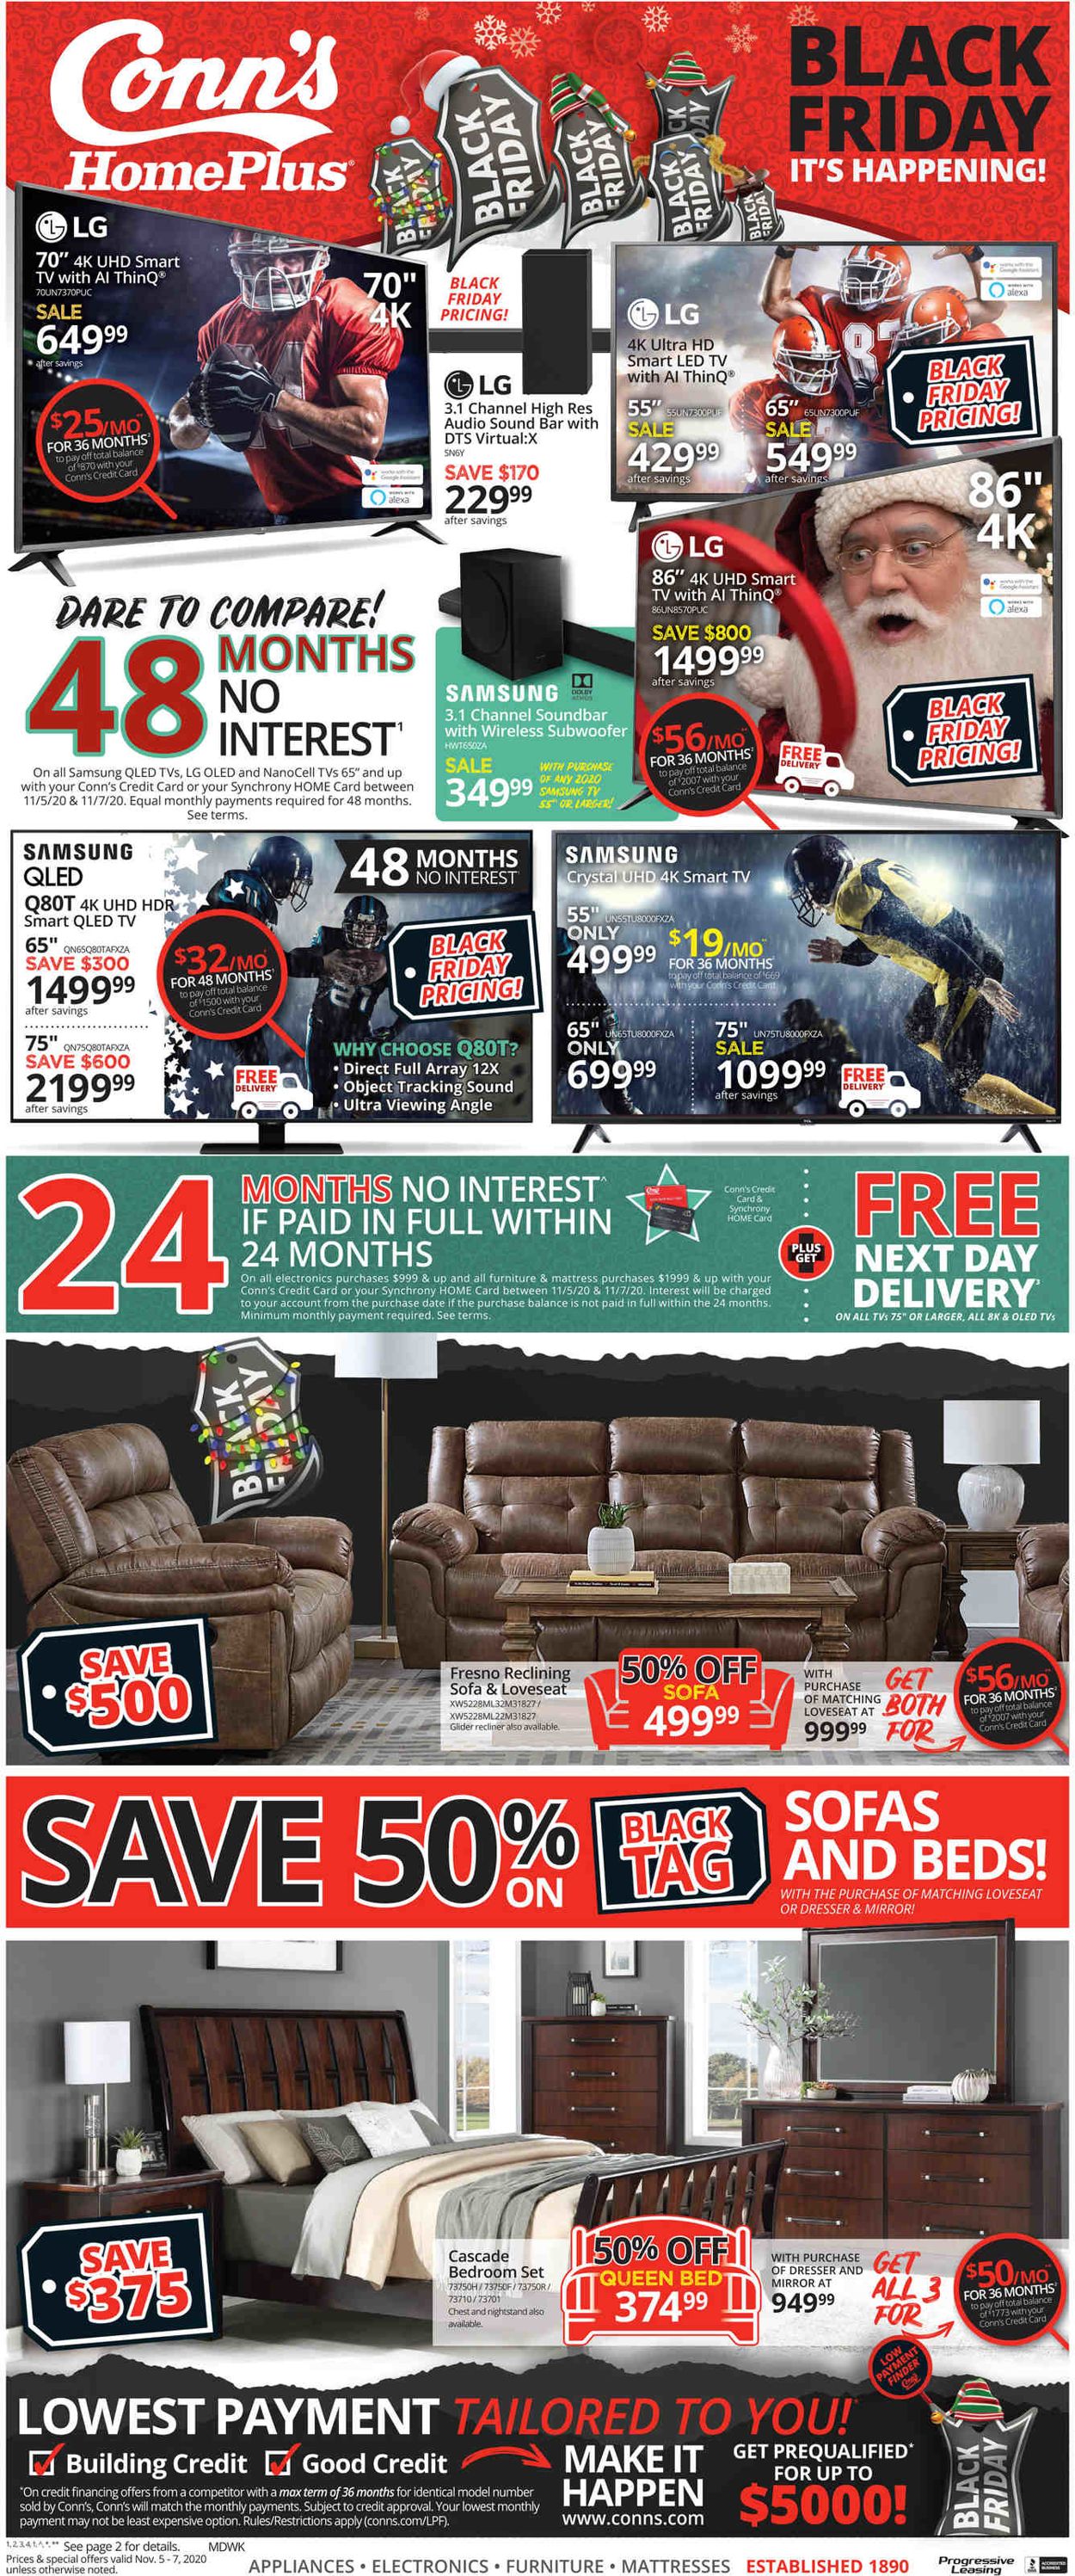 Conn's Home Plus Black Friday 2020 Weekly Ad Circular - valid 11/05-11/07/2020